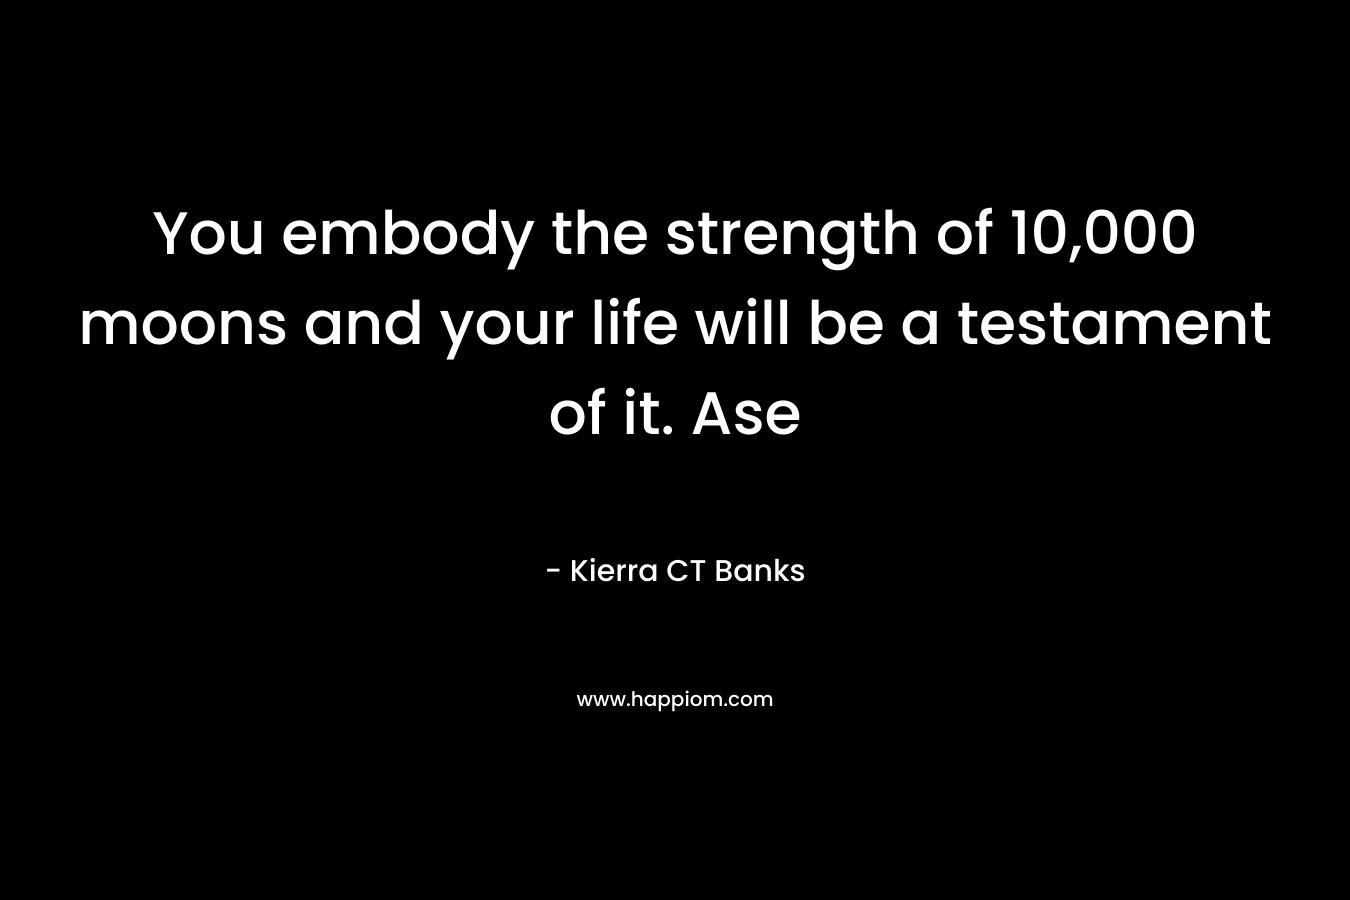 You embody the strength of 10,000 moons and your life will be a testament of it. Ase – Kierra CT Banks